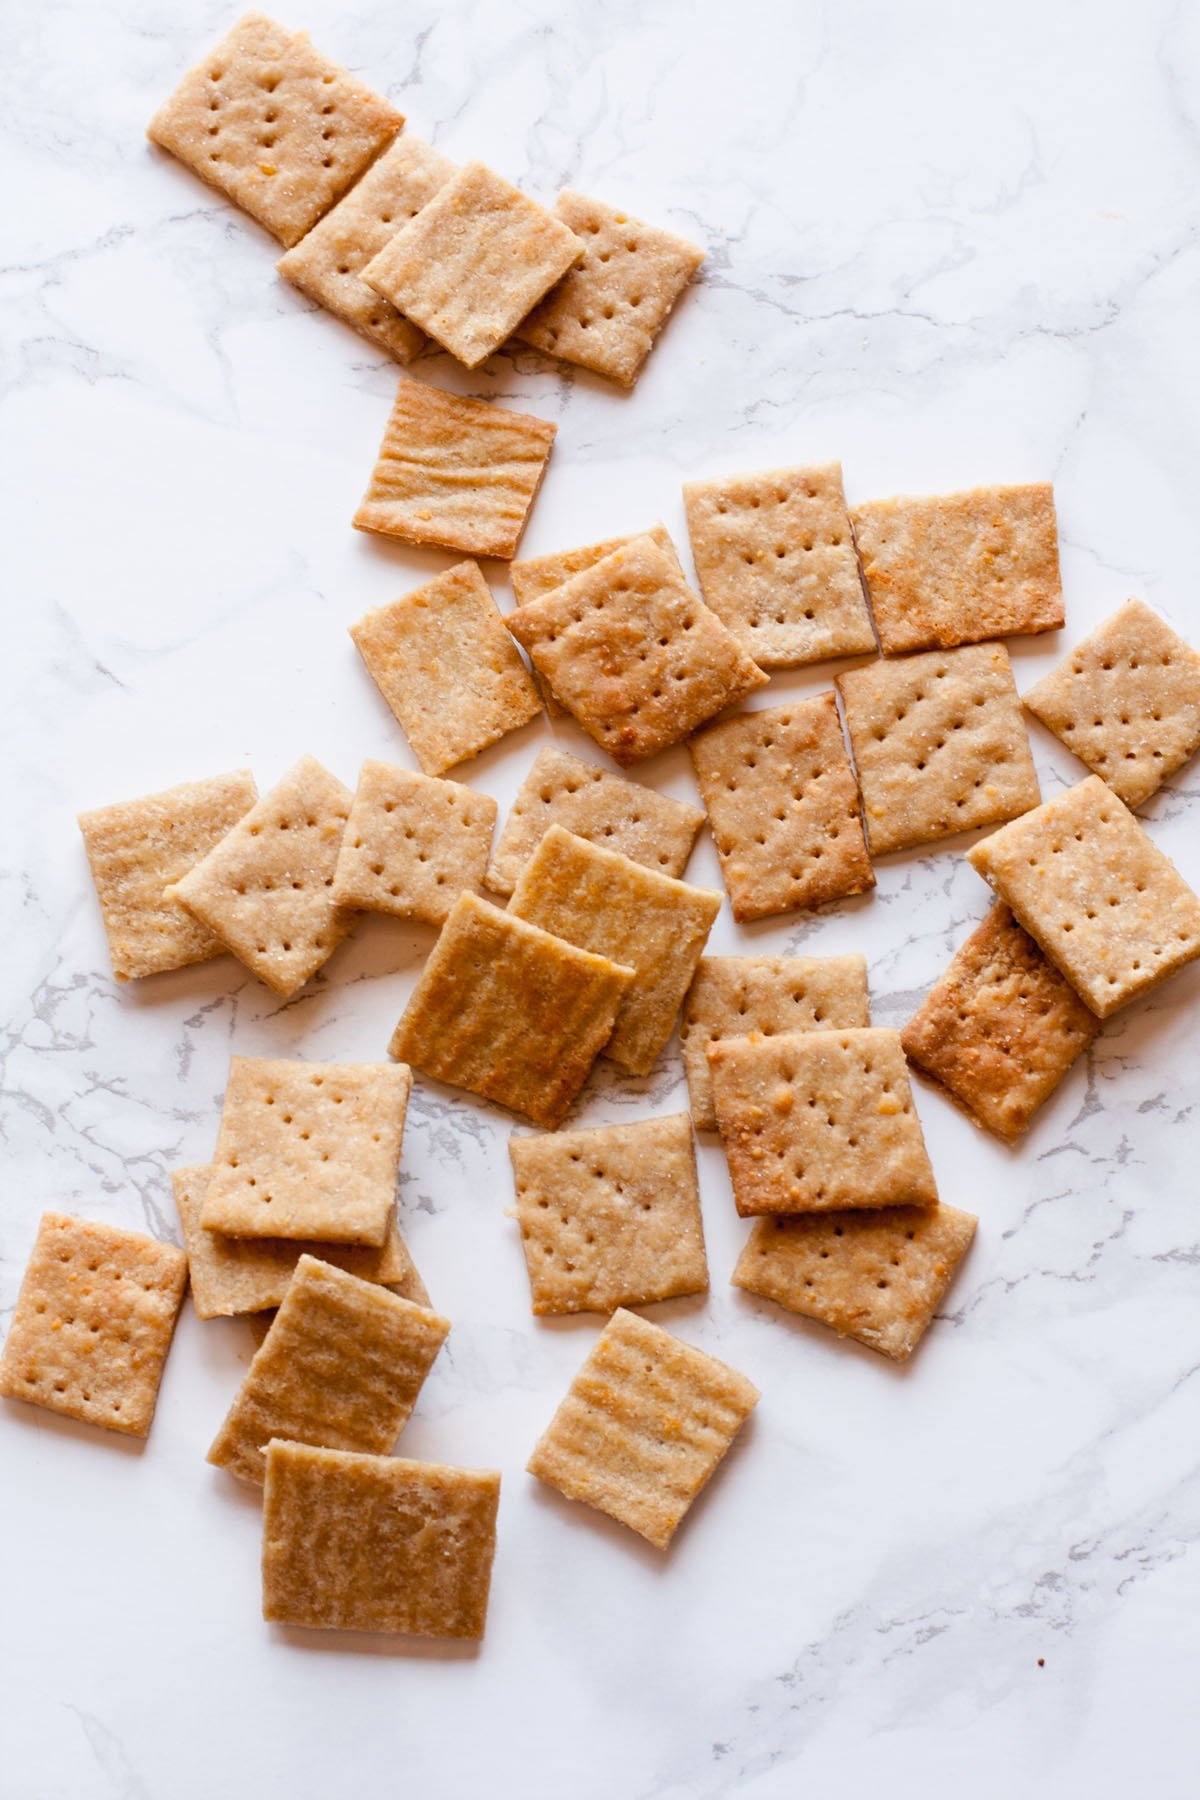 Whole Wheat Parmesan Crackers arranged on a marbled background